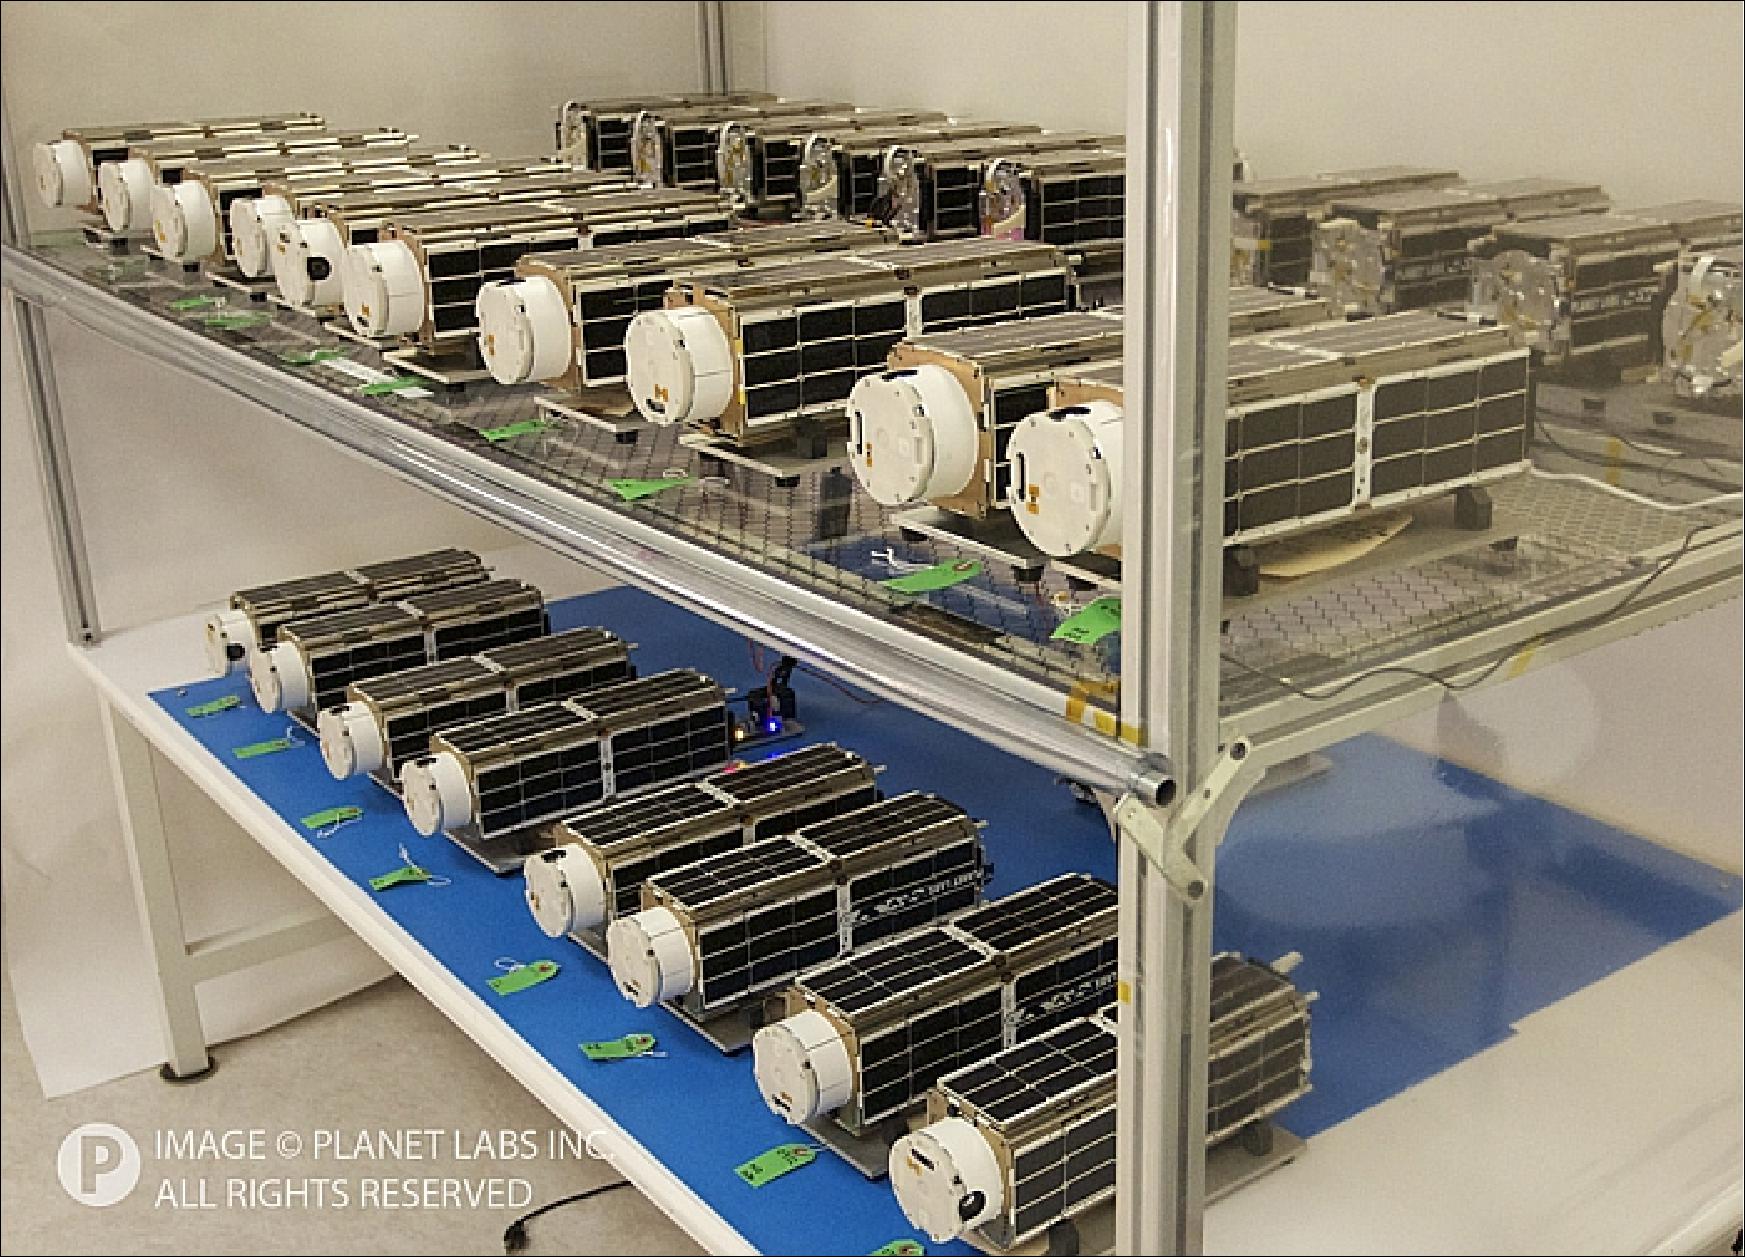 Figure 2: Photo of the 28 Flock 1 nanosatellites before being sent to the launch site (image credit: Planet Labs) 7)